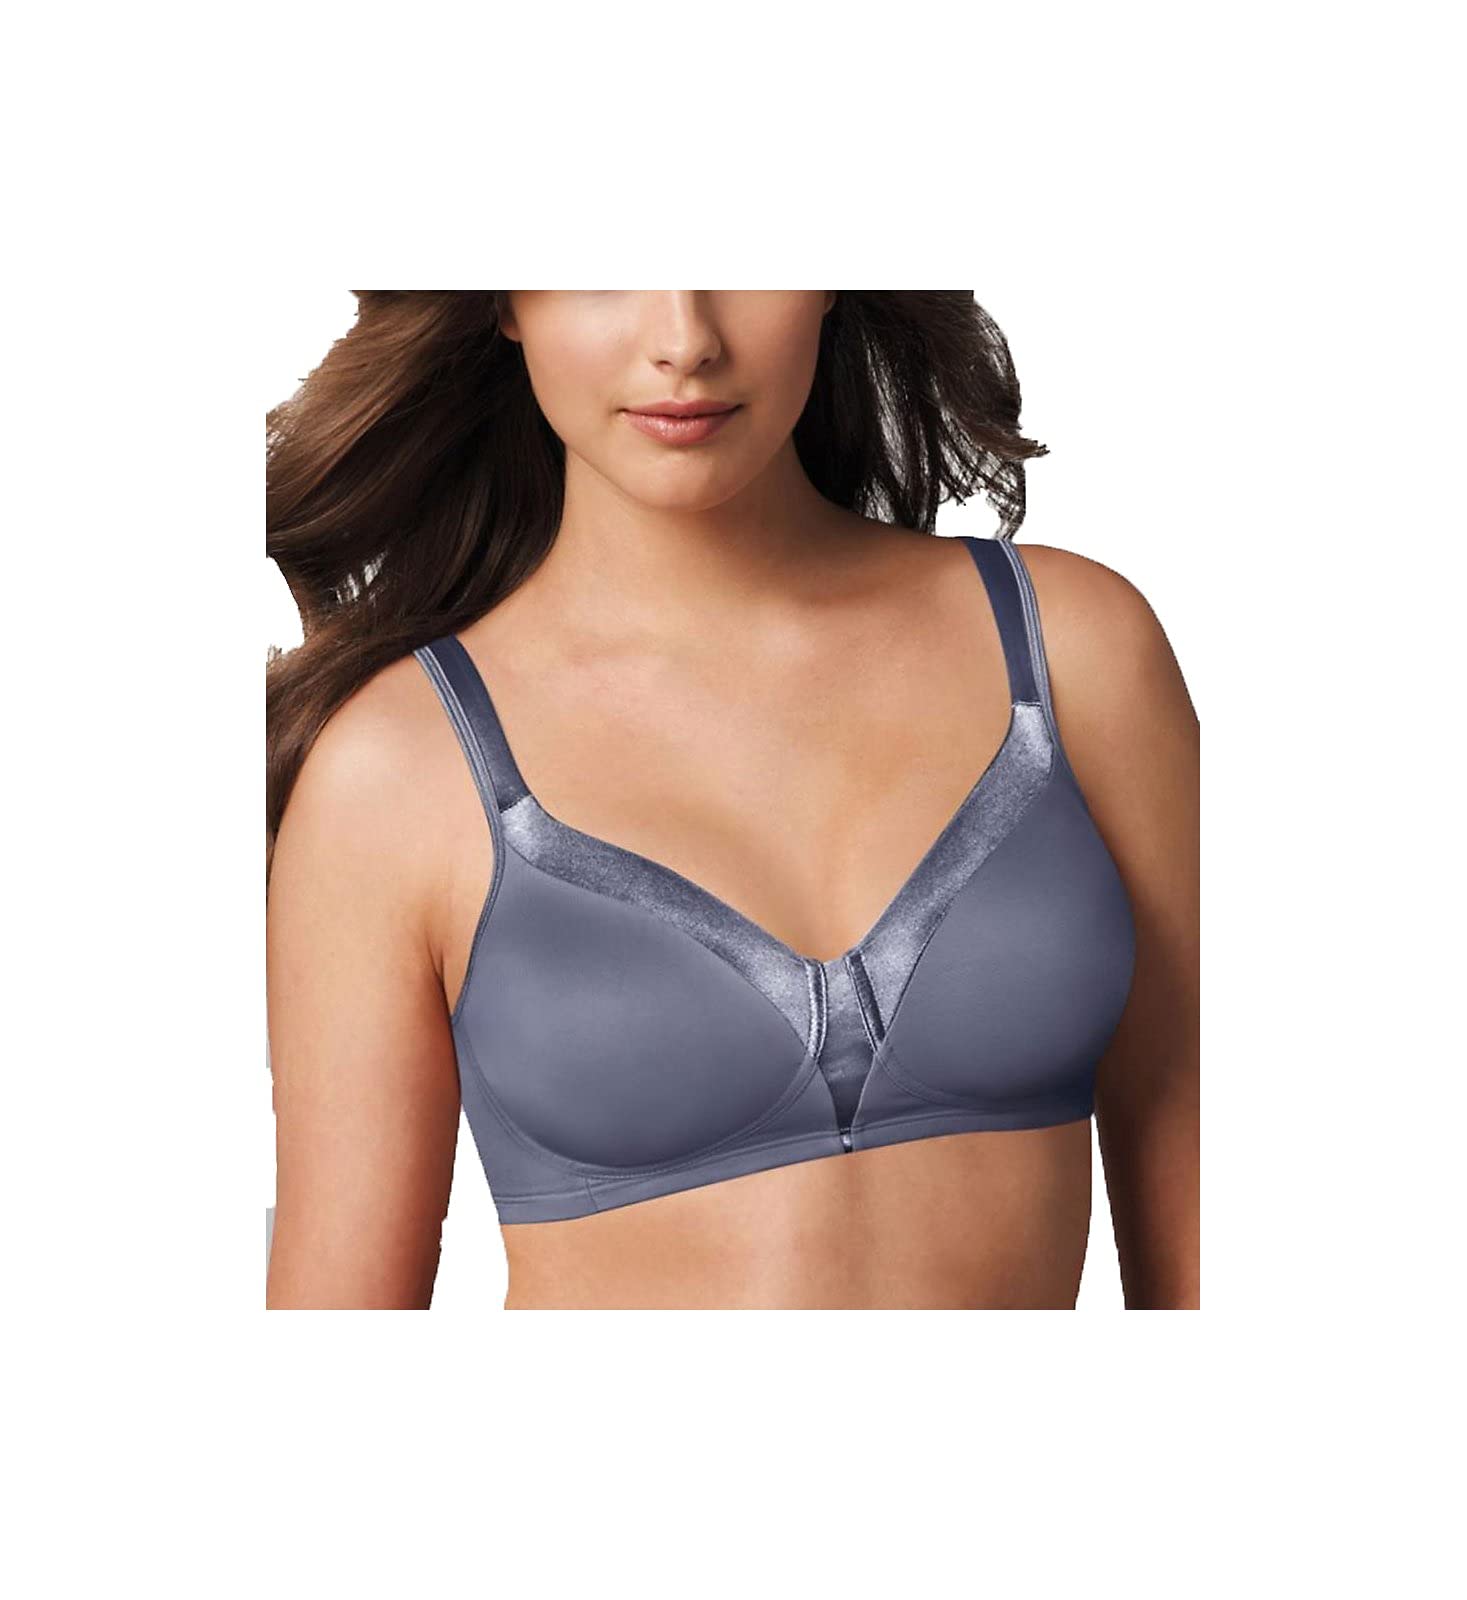 PLAYTEX Womens 18 Hour Silky Soft Smoothing Wireless Us4803 Available with  2-Pack Option Bra, 2 Pack - Private Jet/Nude, 36C US, 2 Pack - Private